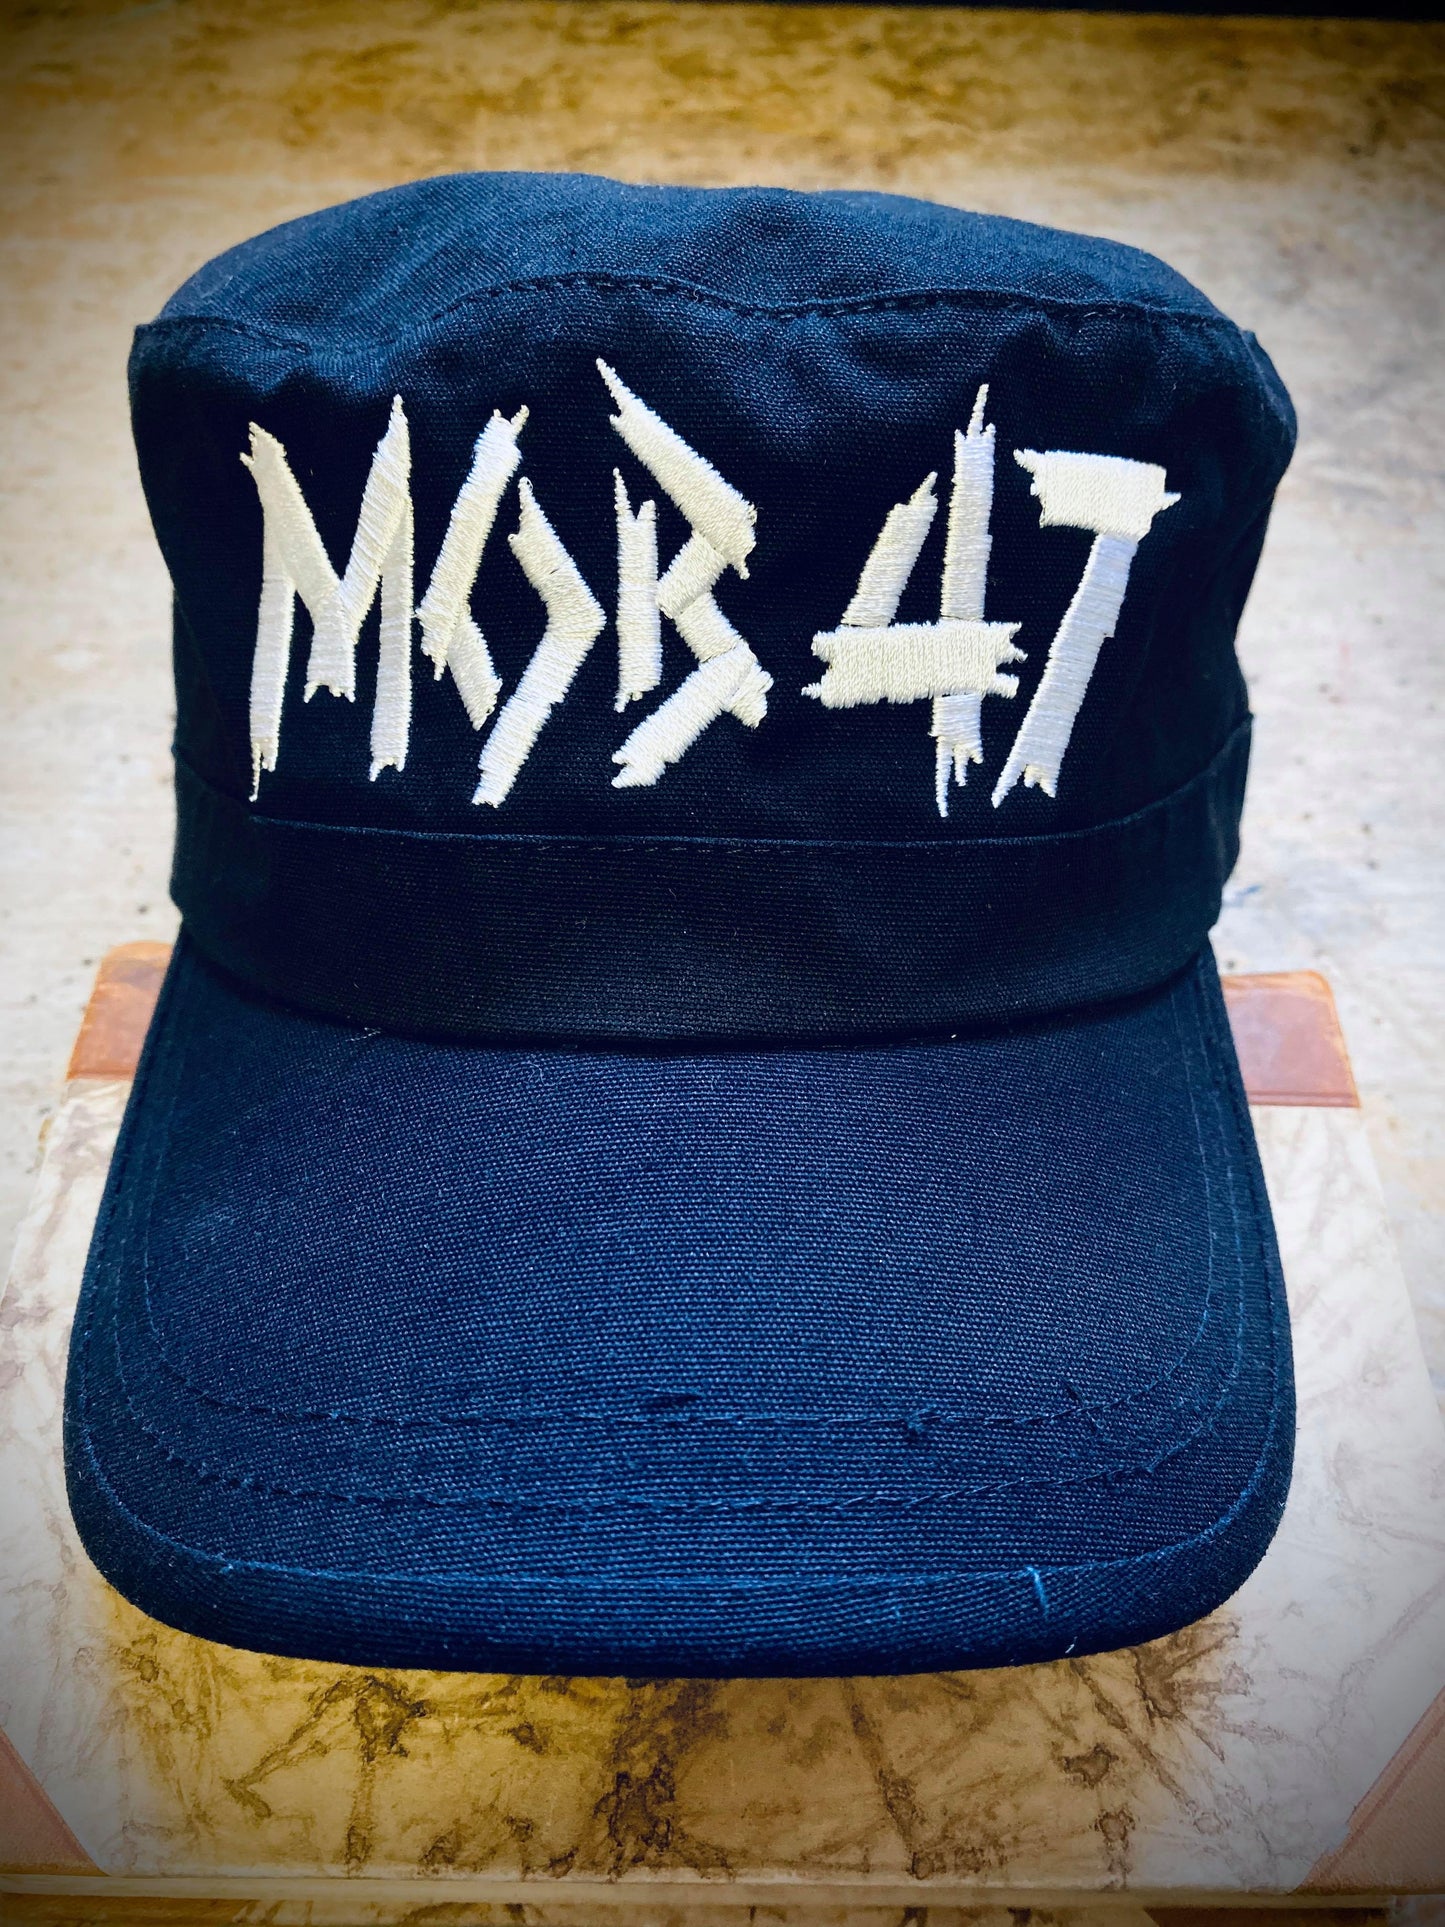 Mob 47 Military Cap by Insane//Phobia embroidery